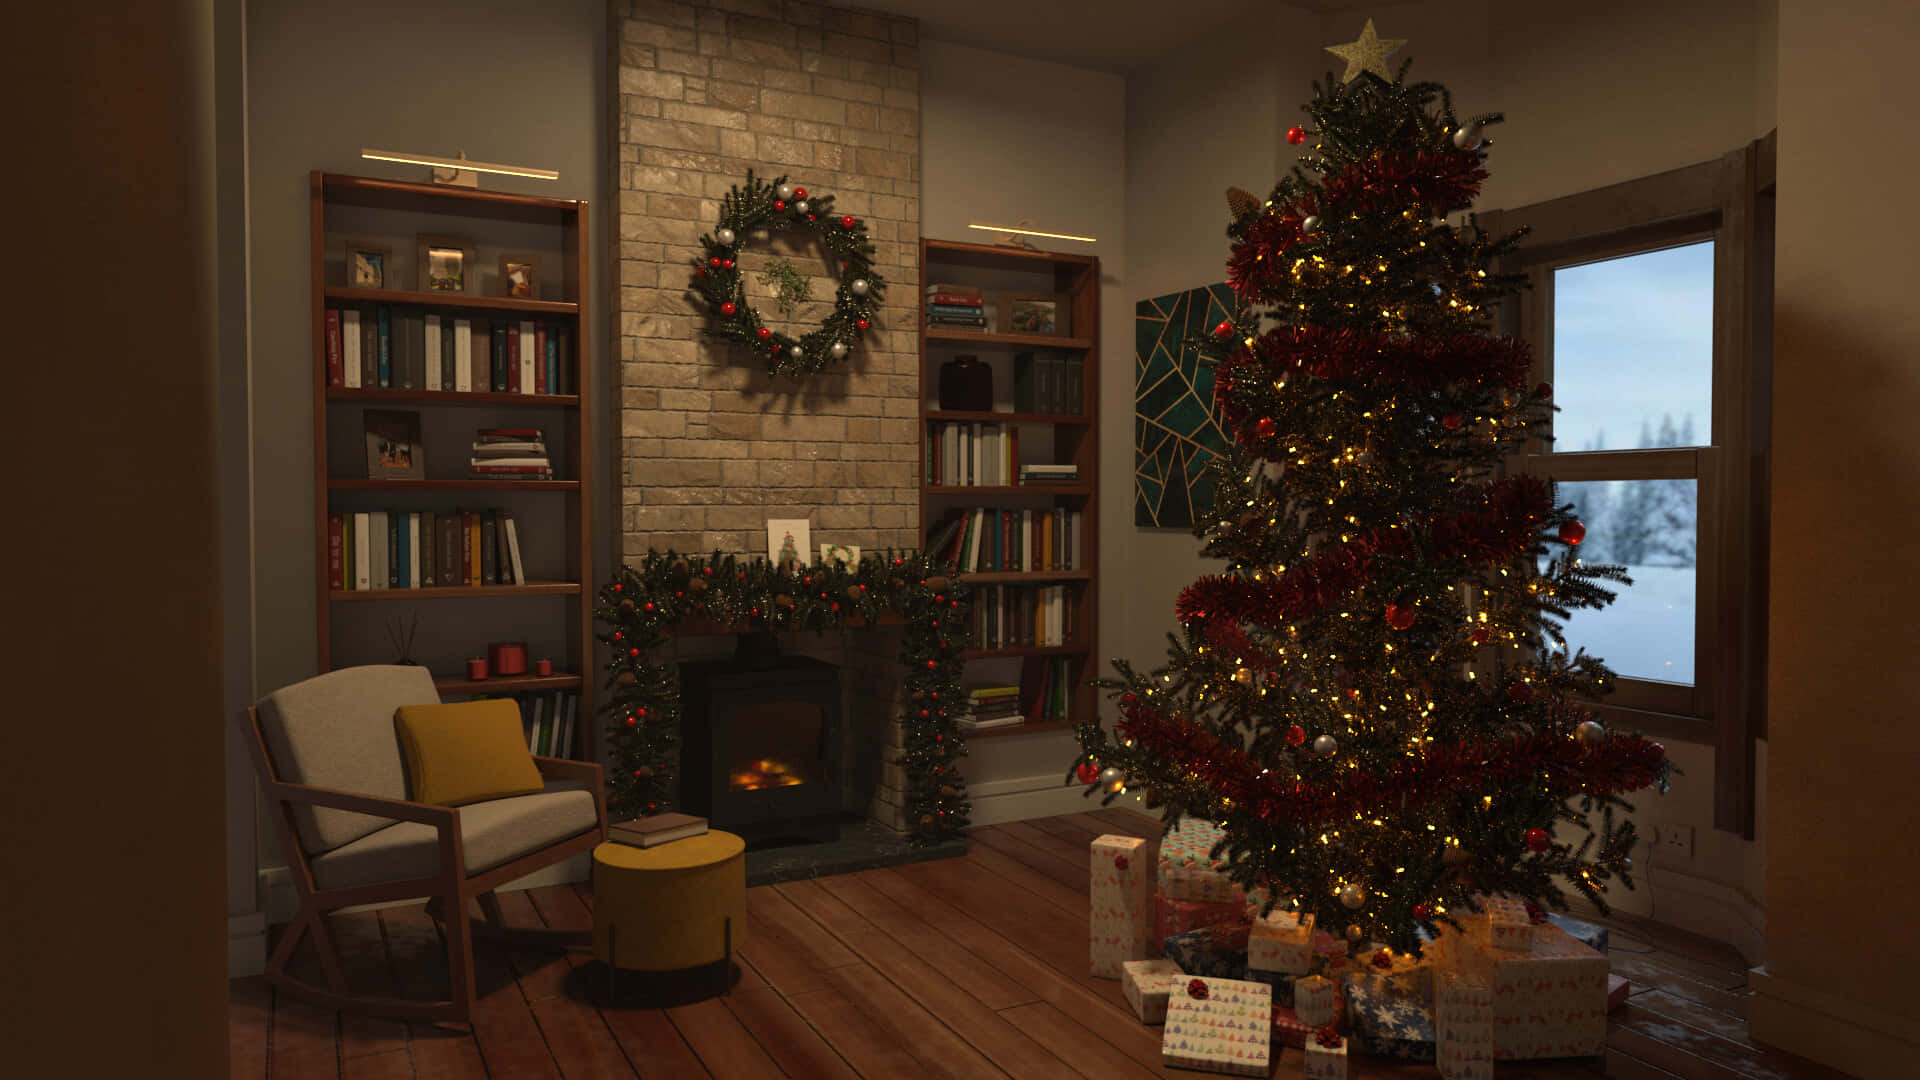 "Feeling The Holiday Spirit in This Christmas Living Room Setup!"